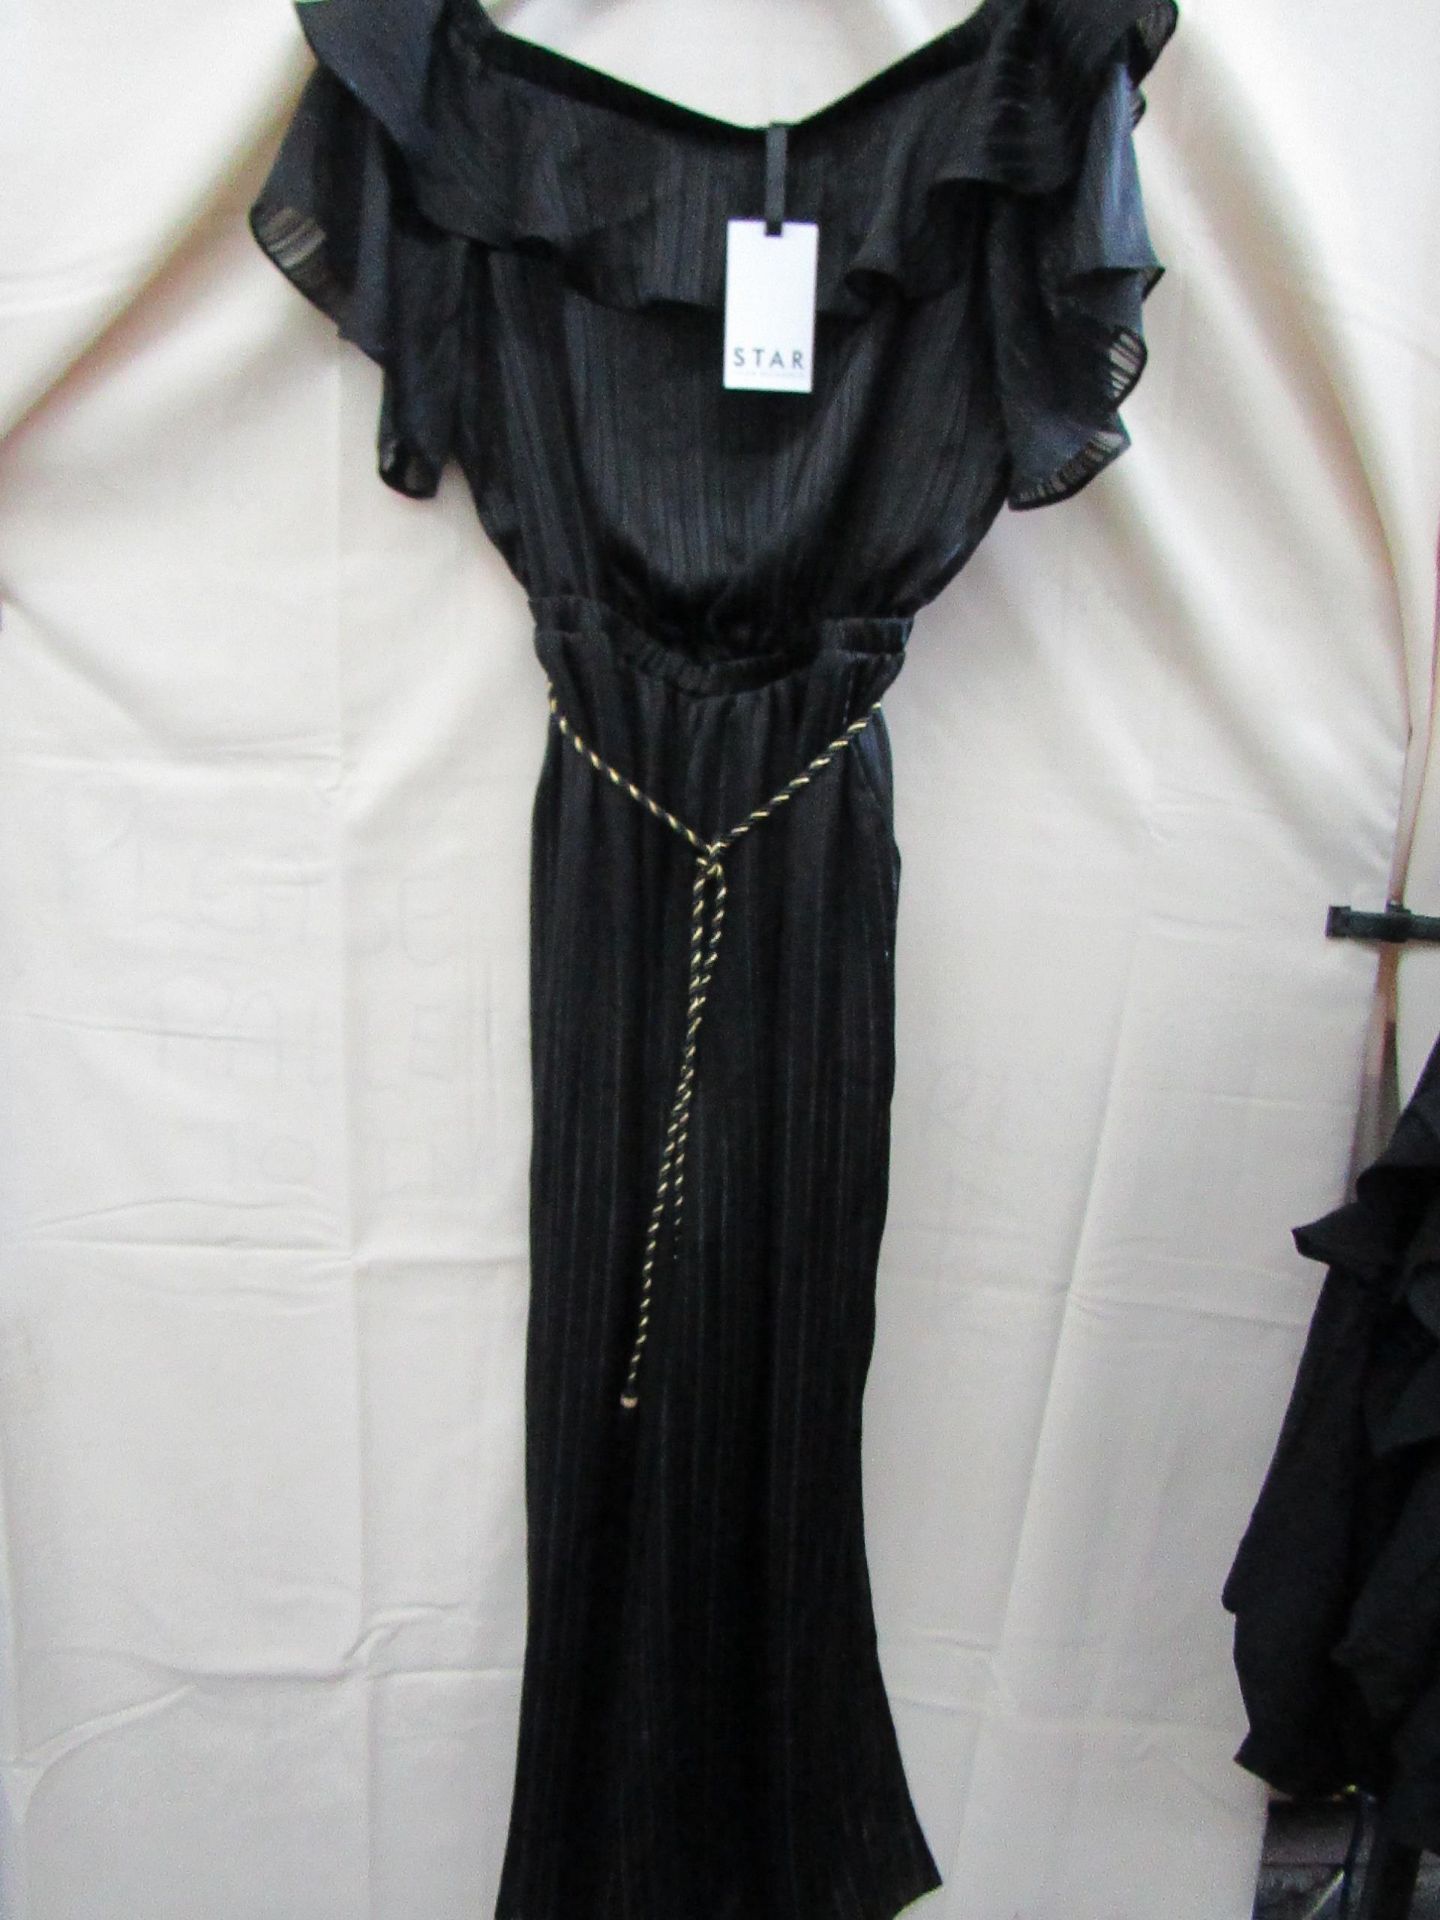 Star By Julien Macdonald Jumpsuit Black Size 10 New With Tags